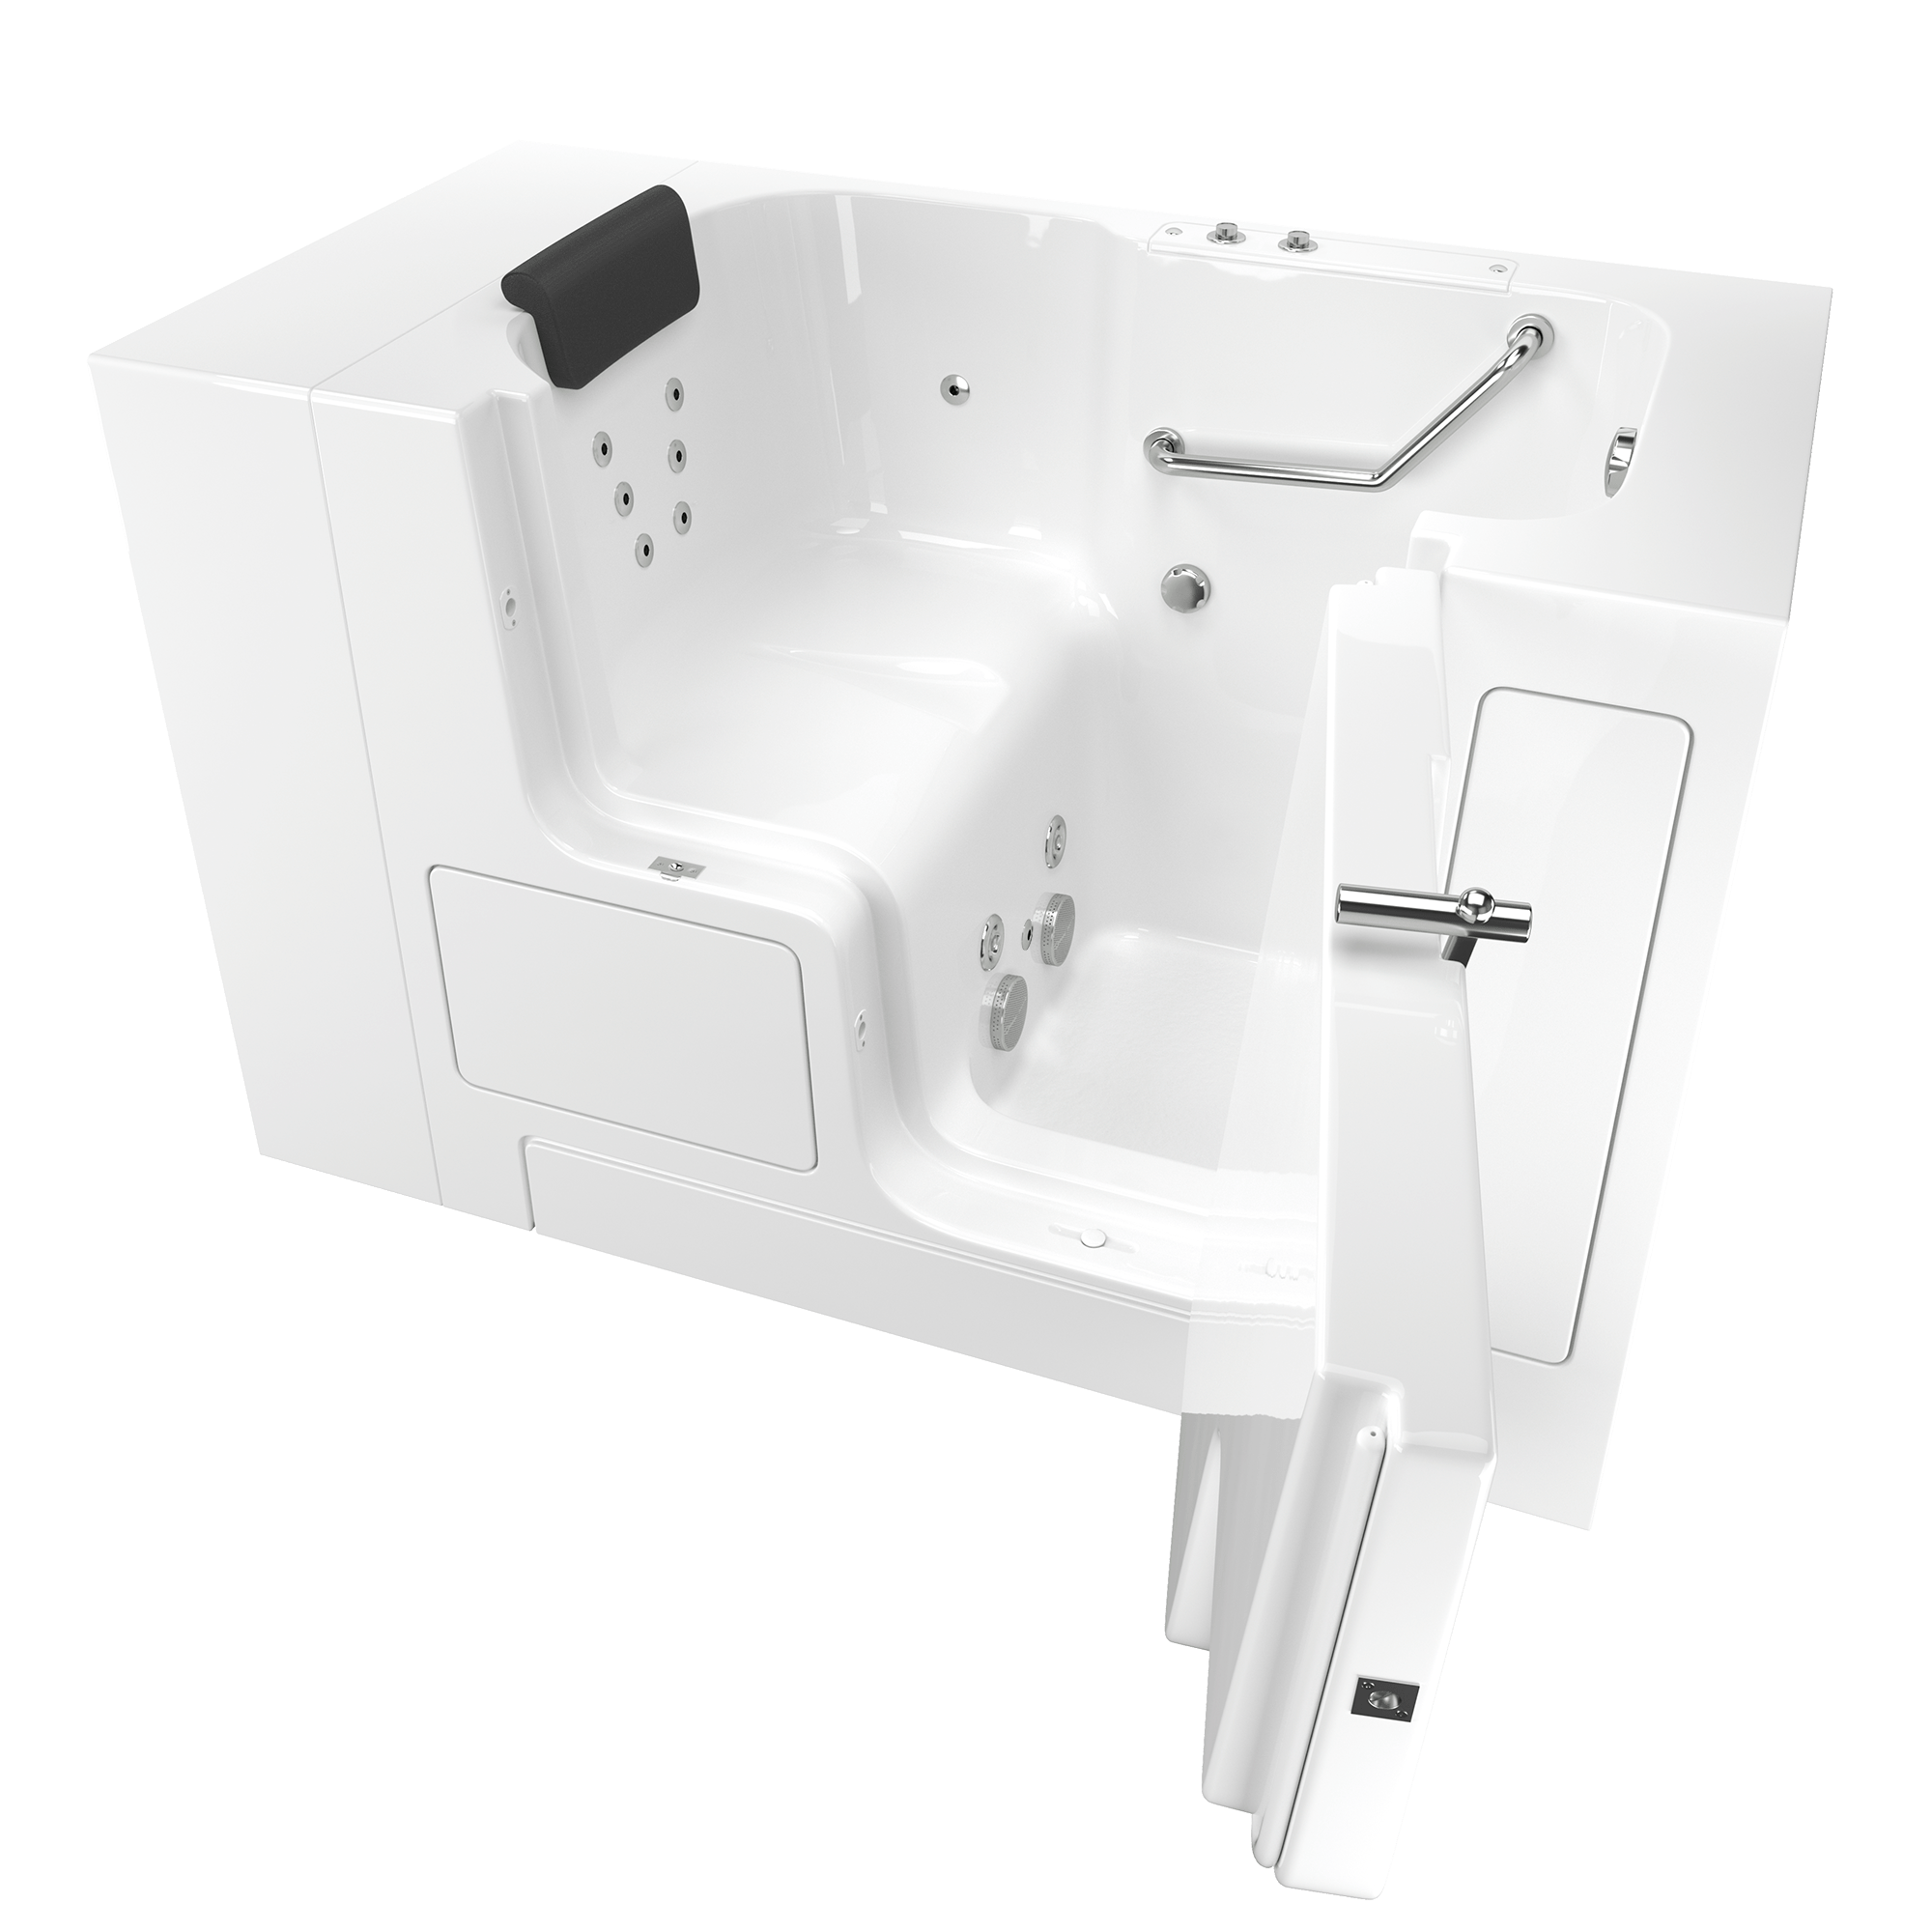 Gelcoat Premium Series 32 x 52 -Inch Walk-in Tub With Whirlpool System - Right-Hand Drain